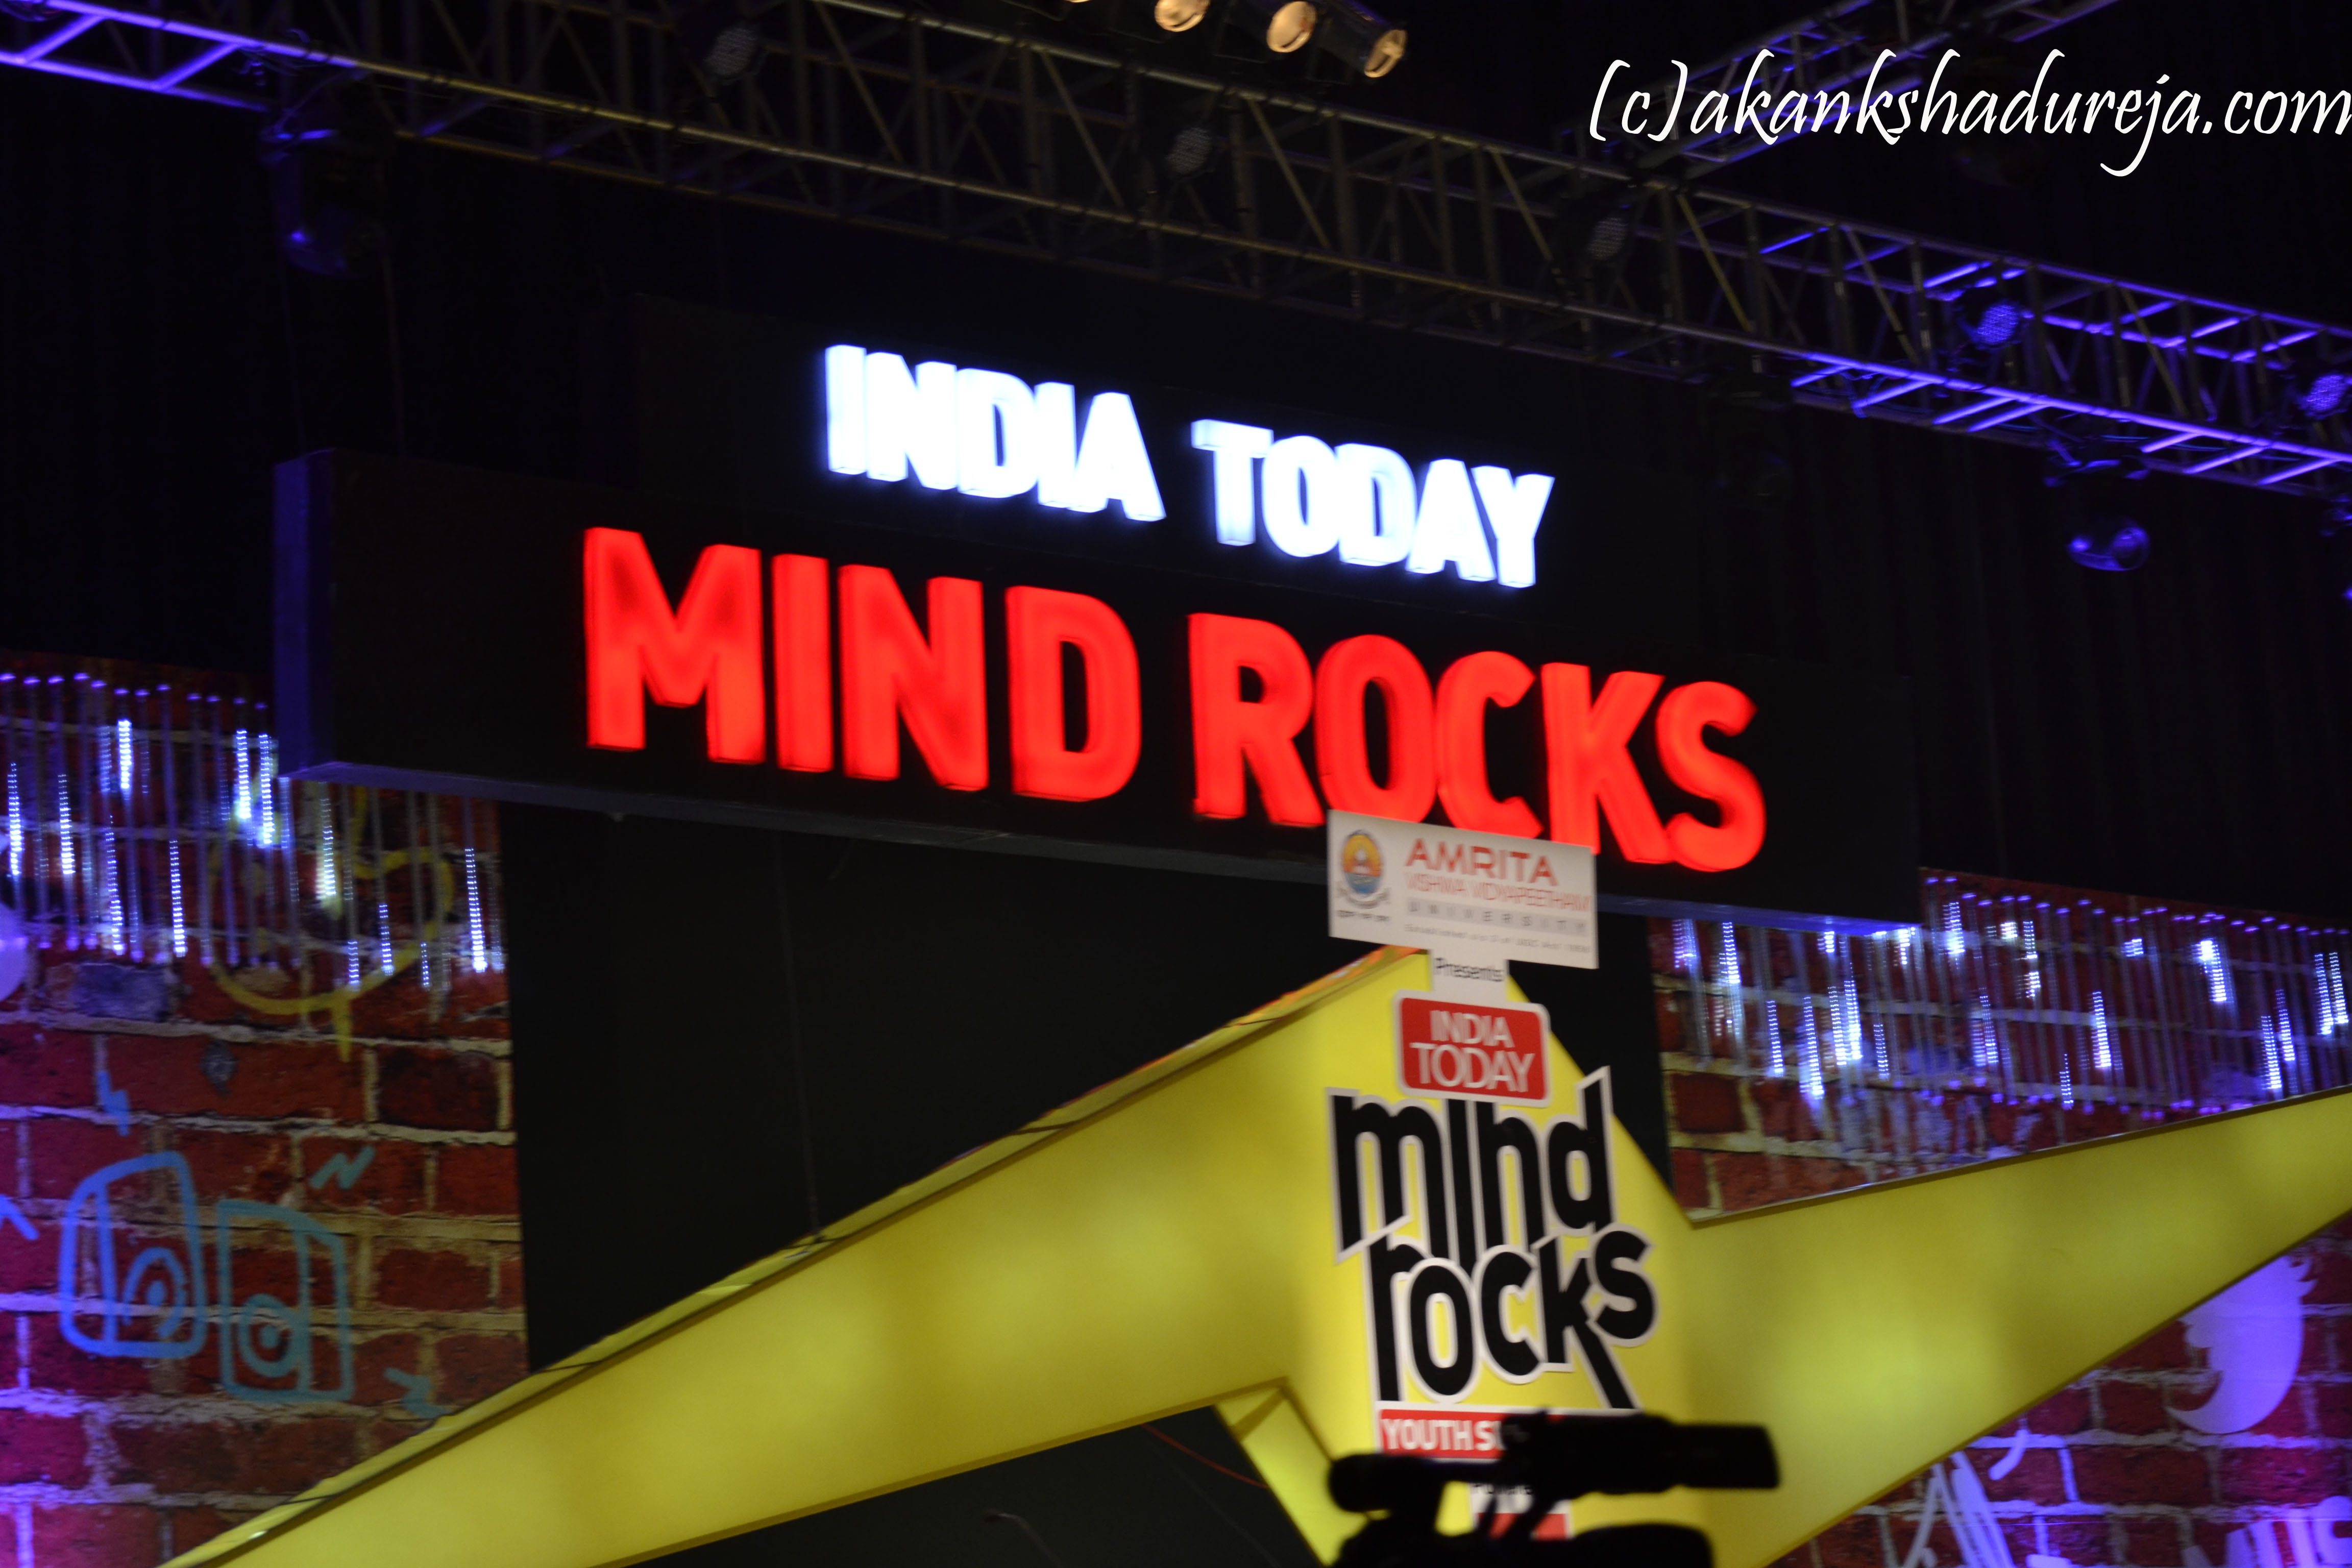 Mind Rocks: Youthful, vibrant and inspiring once again